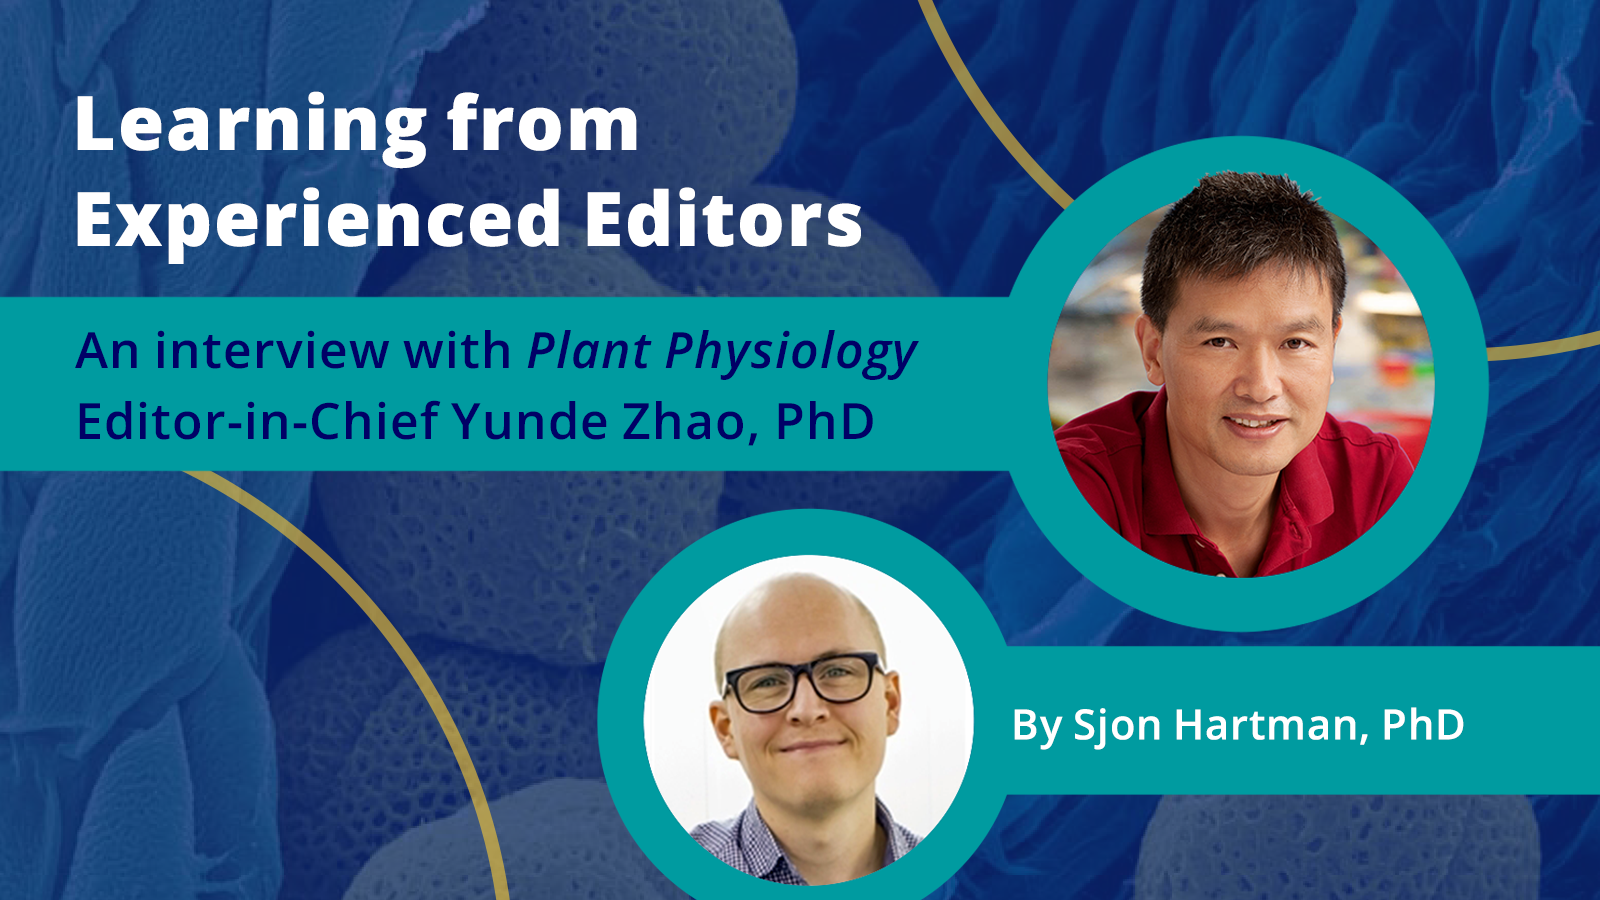 Interviews by Plant Physiology Associate Features Editors